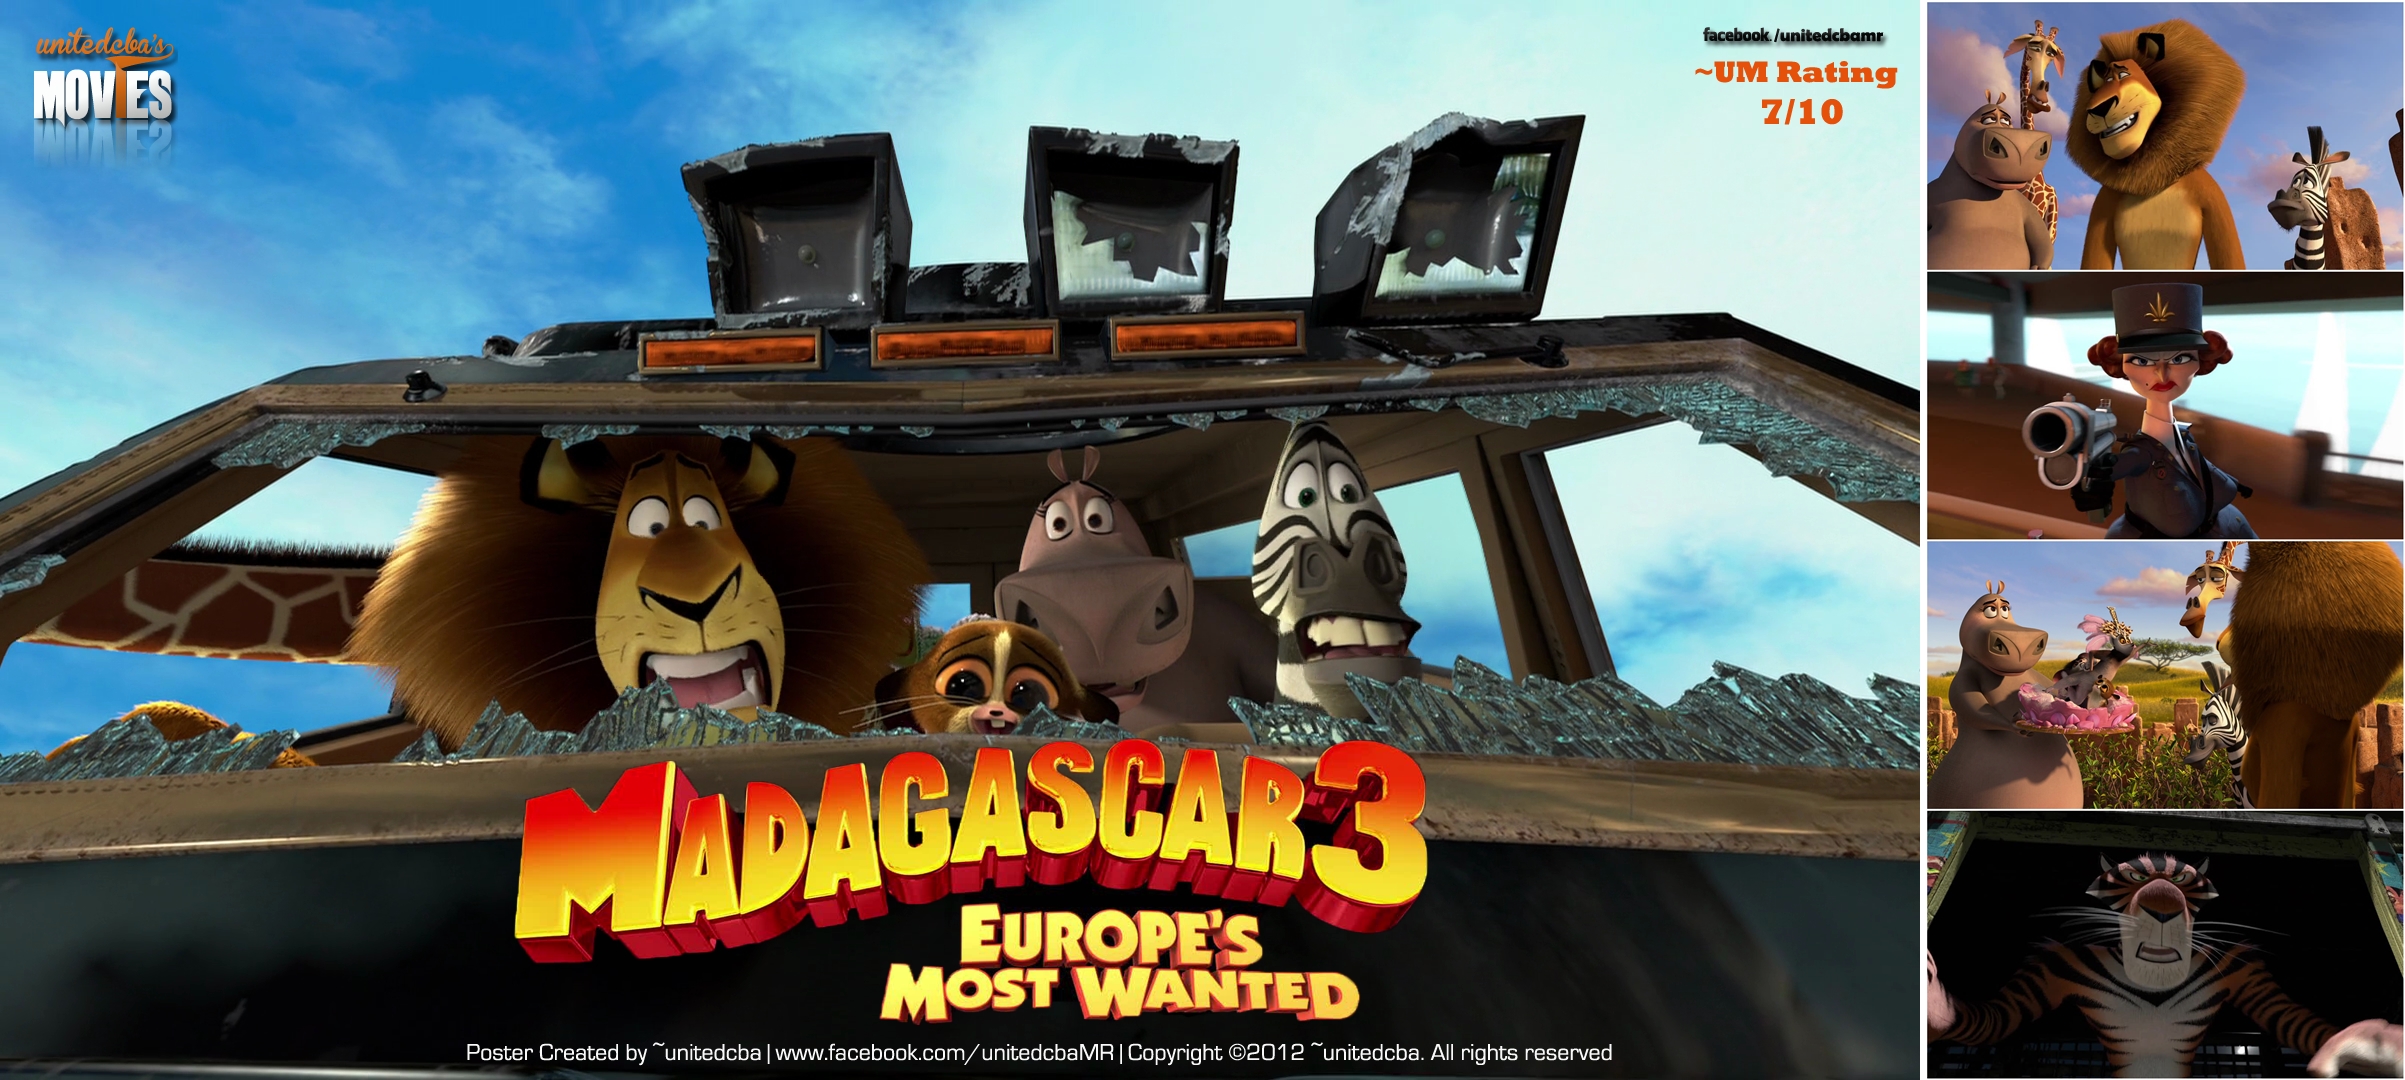 HQ Madagascar 3: Europe's Most Wanted Wallpapers | File 1439.99Kb